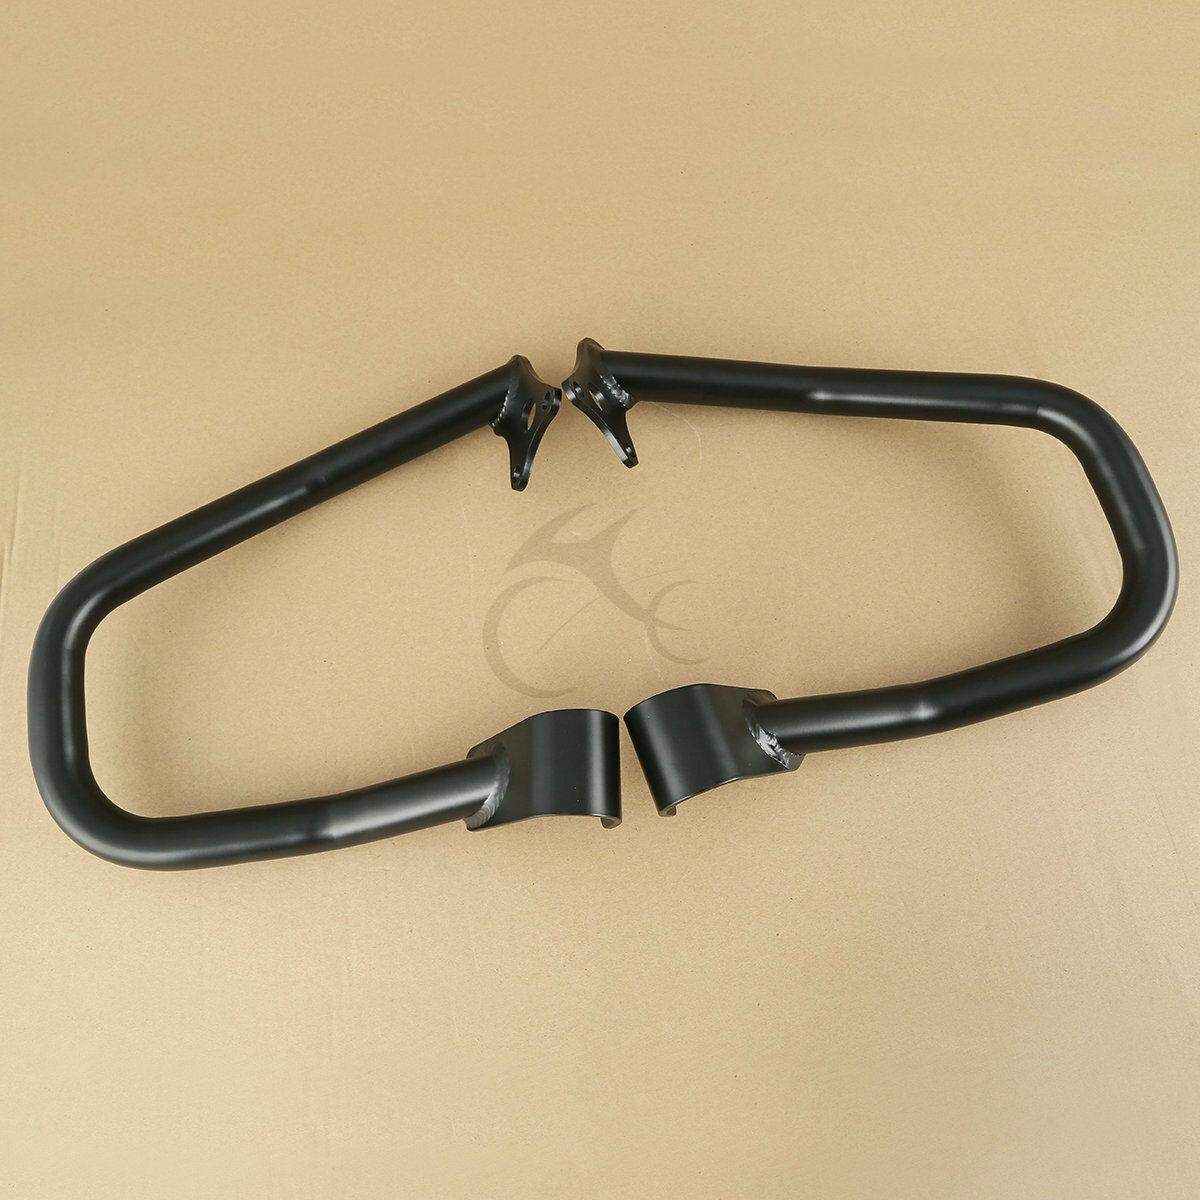 Highway Engine Guard Crash Bar For Indian Scout 2015-2021 Sixty 2016-2021 2020 - Moto Life Products